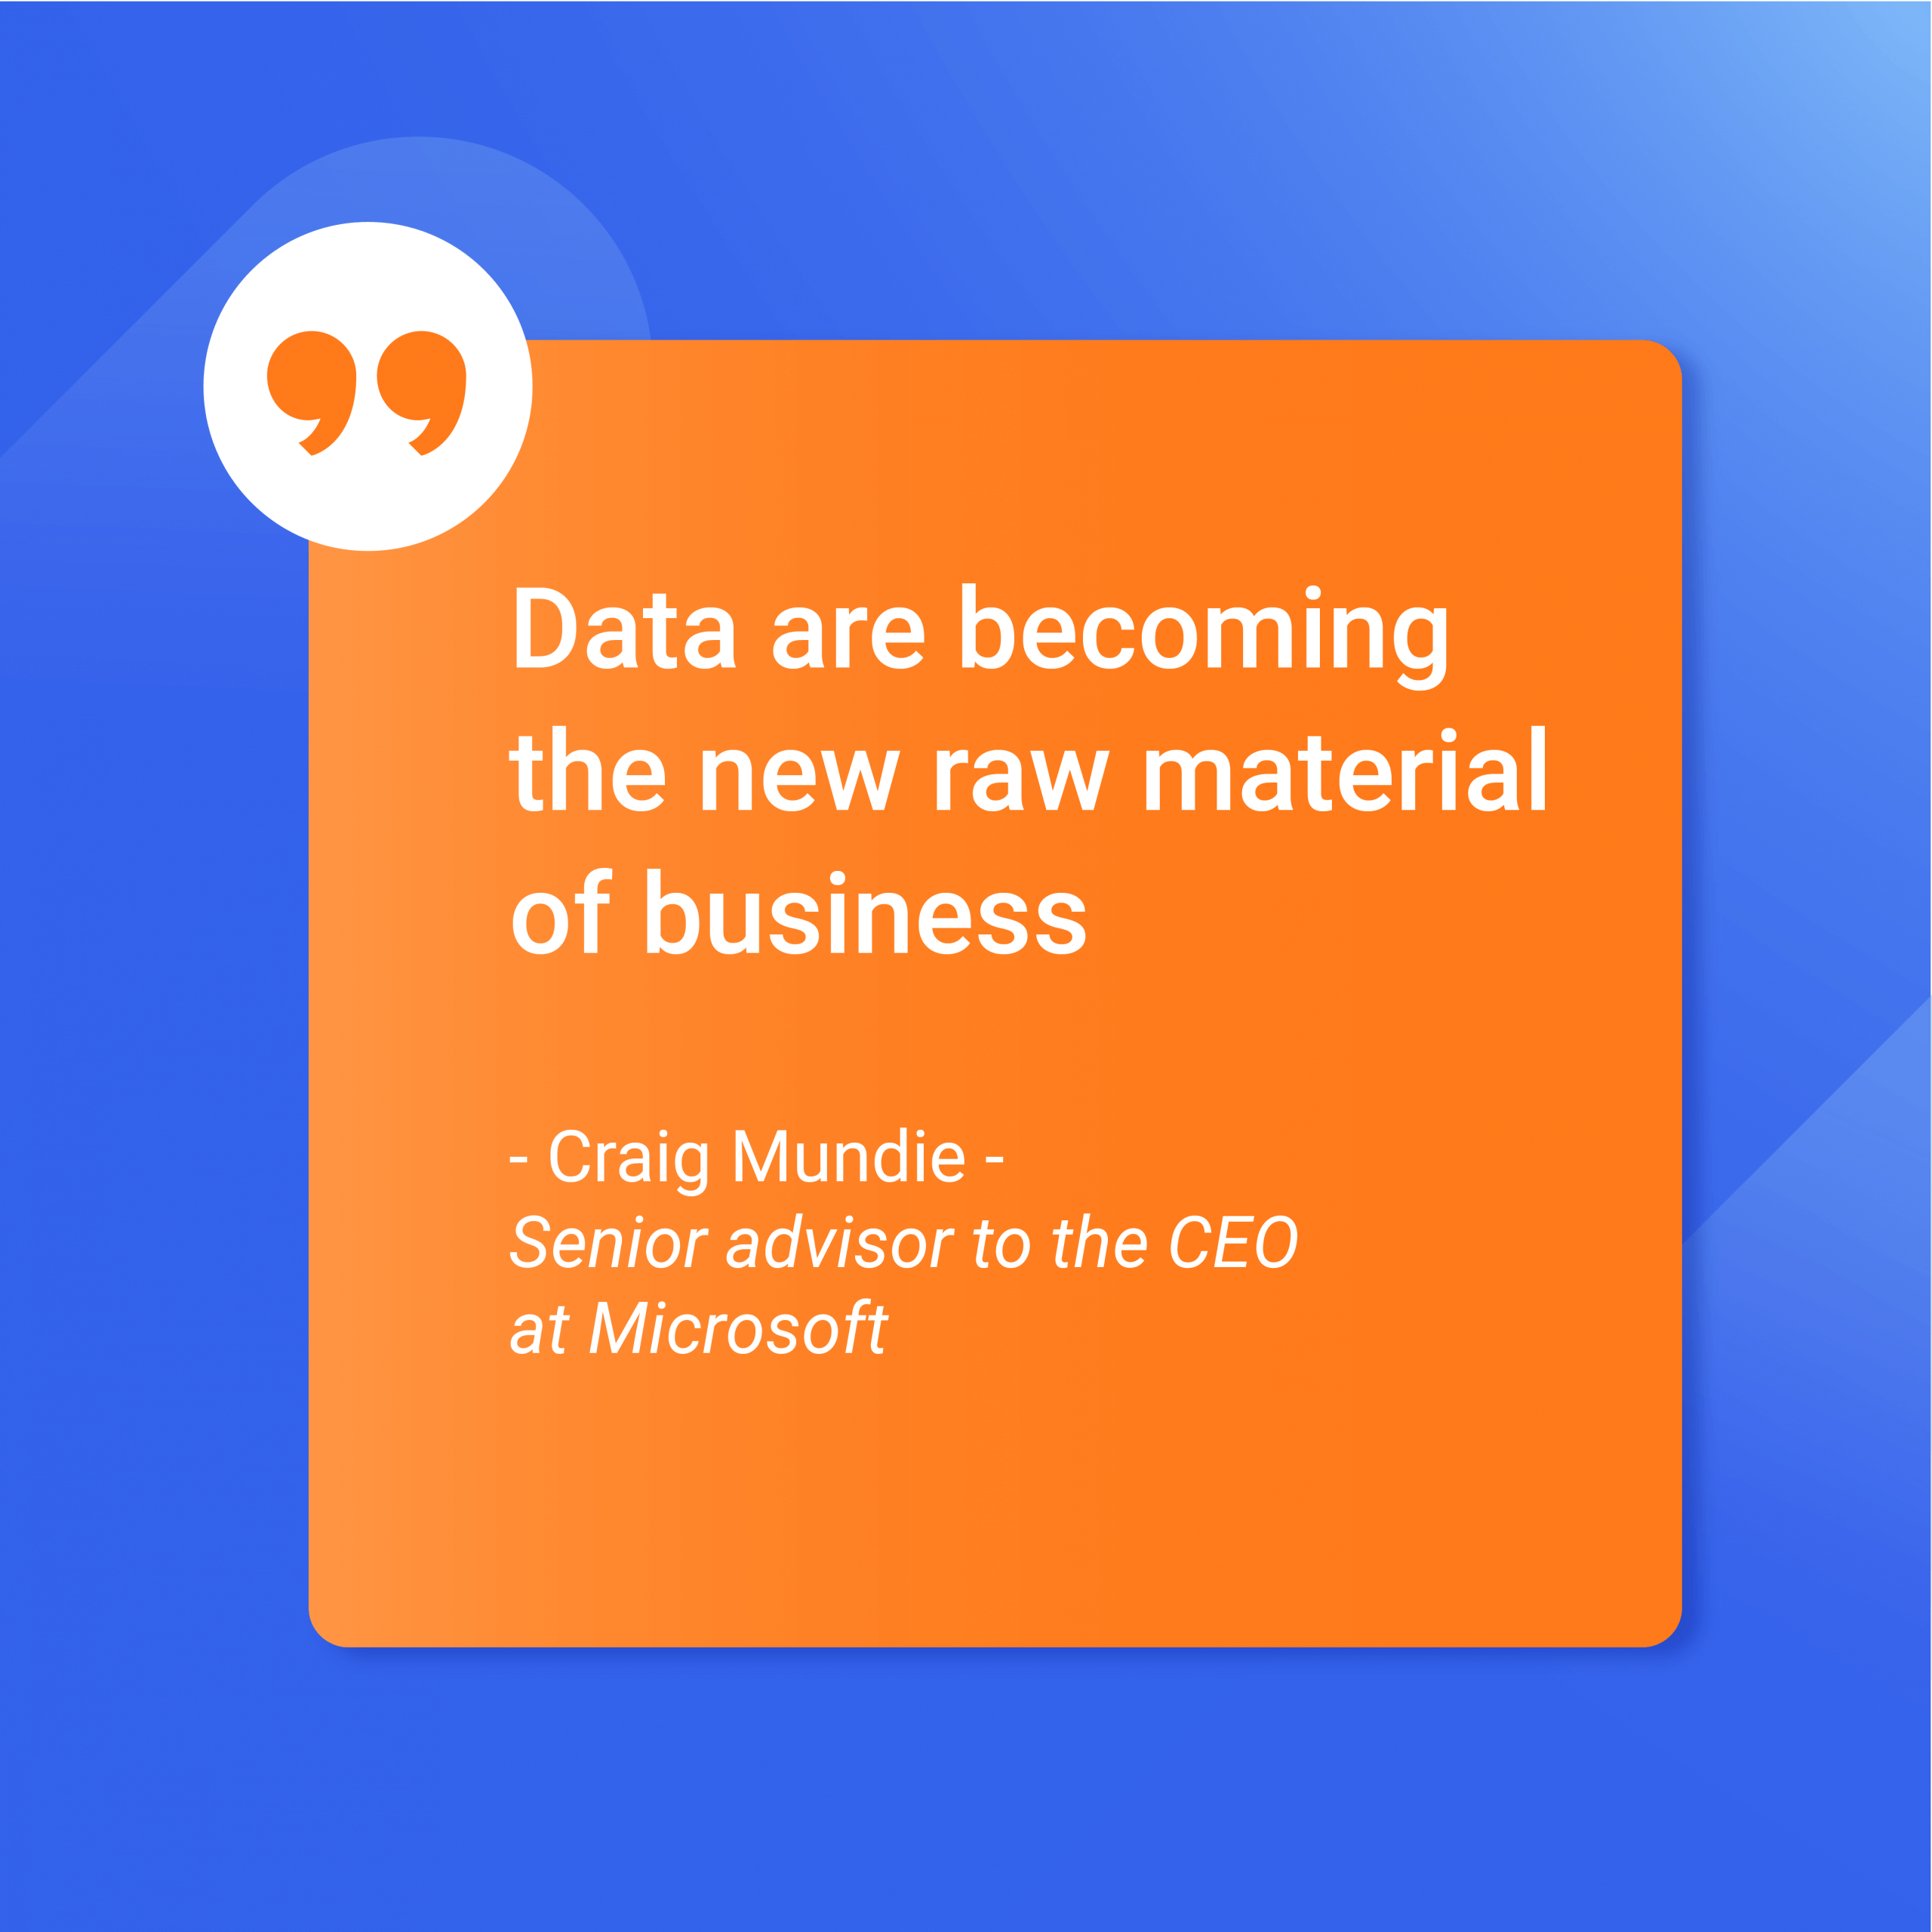 The importance of data as told by Craig Mundie from Microsoft.